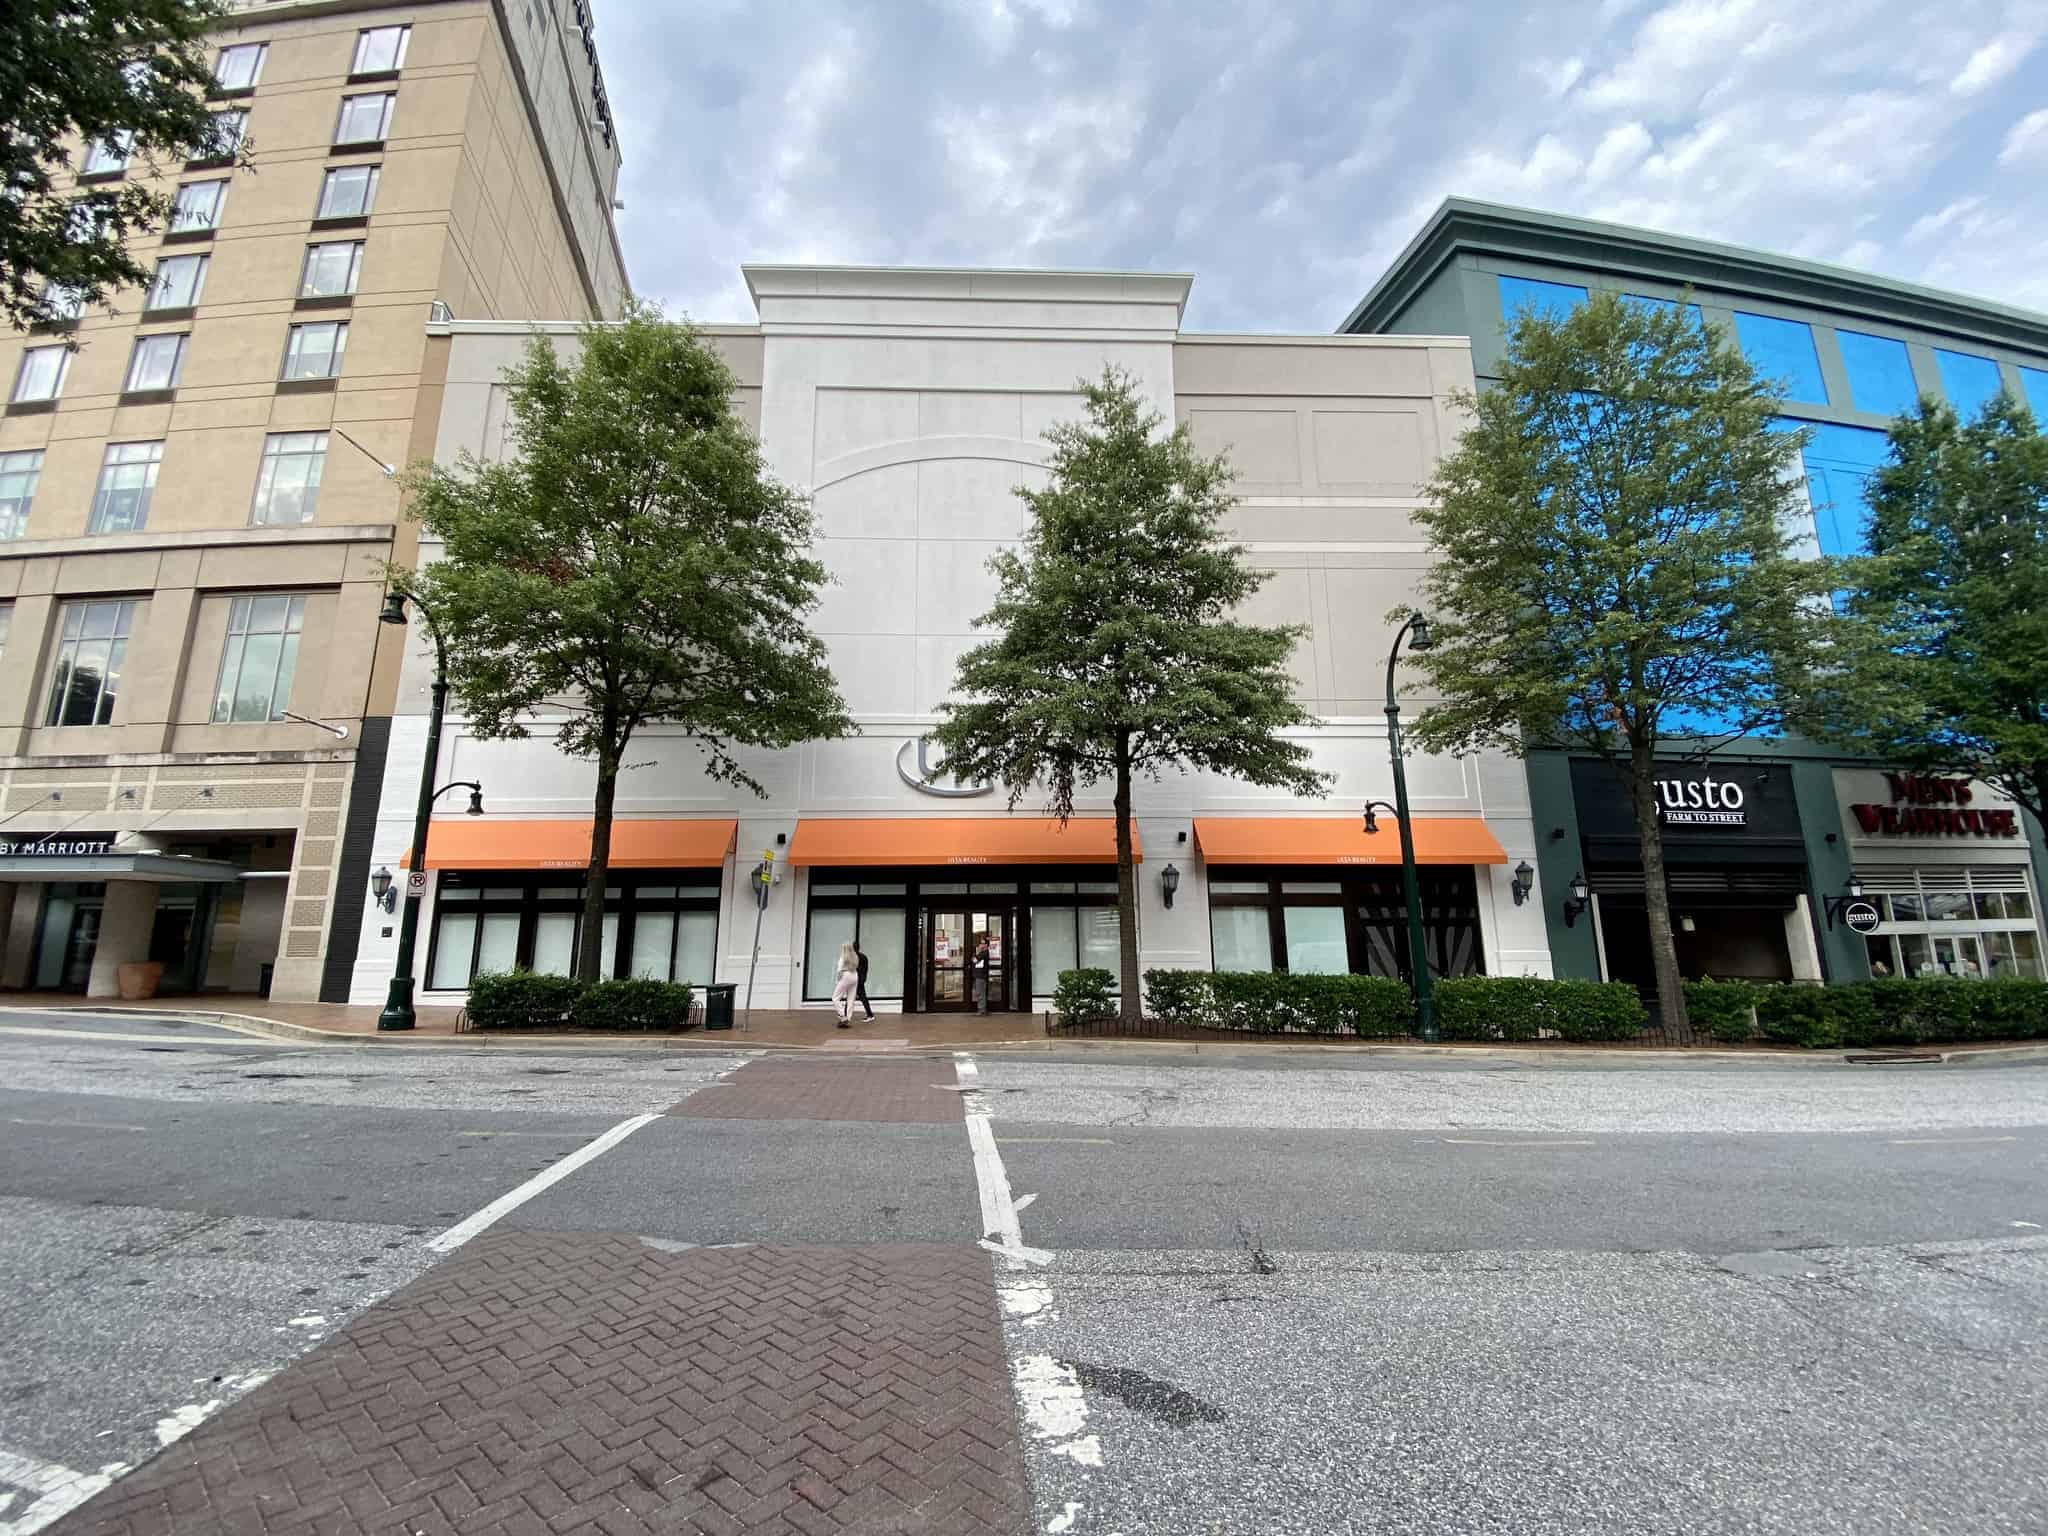 Ulta Beauty to Open September 29 at New Downtown Silver Spring Location